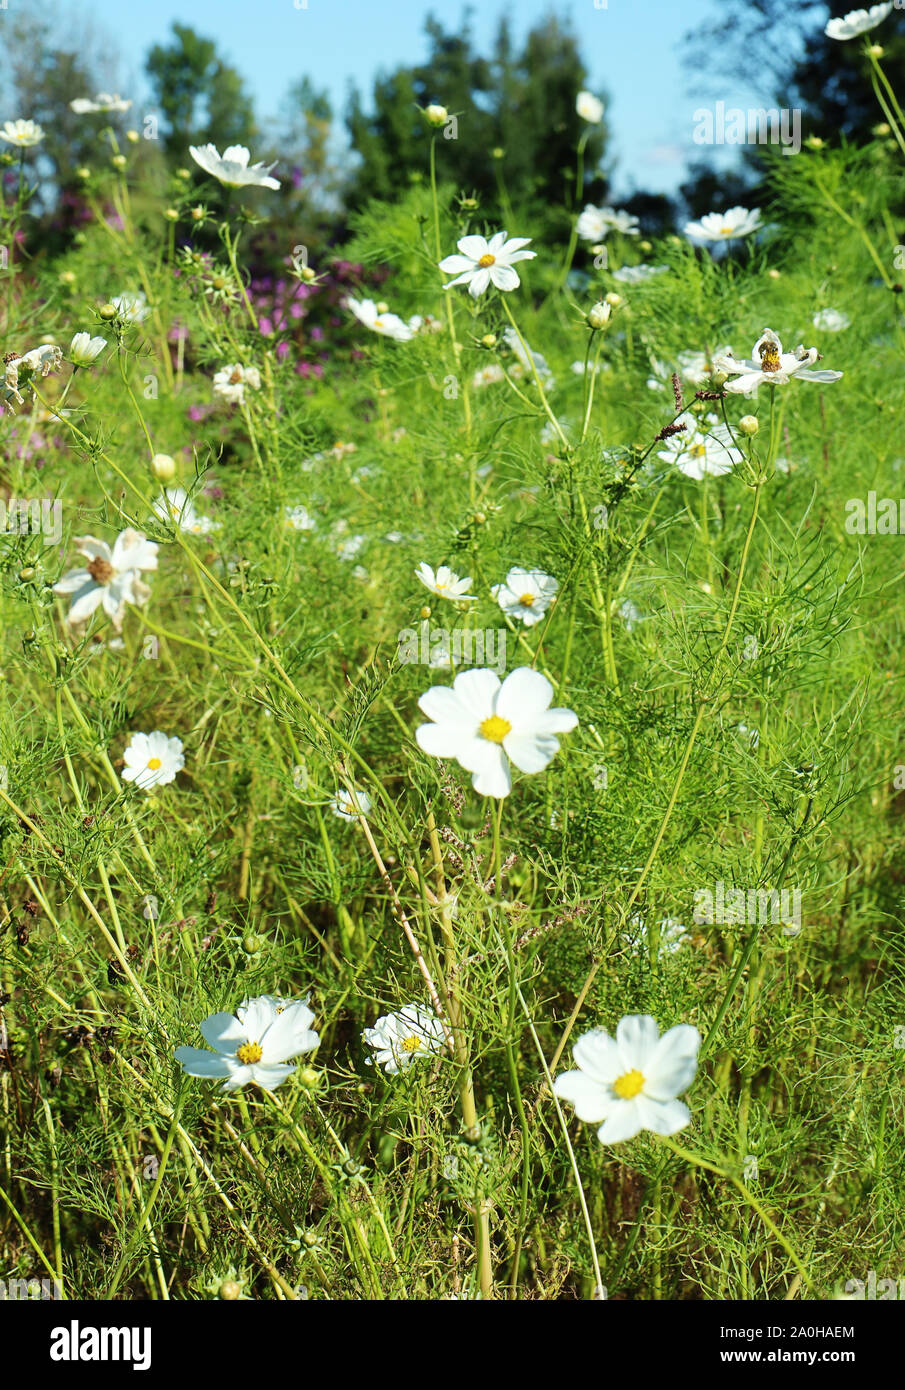 Summer meadow in Bavaria countryside full of beautiful white daisy wildflowers Stock Photo